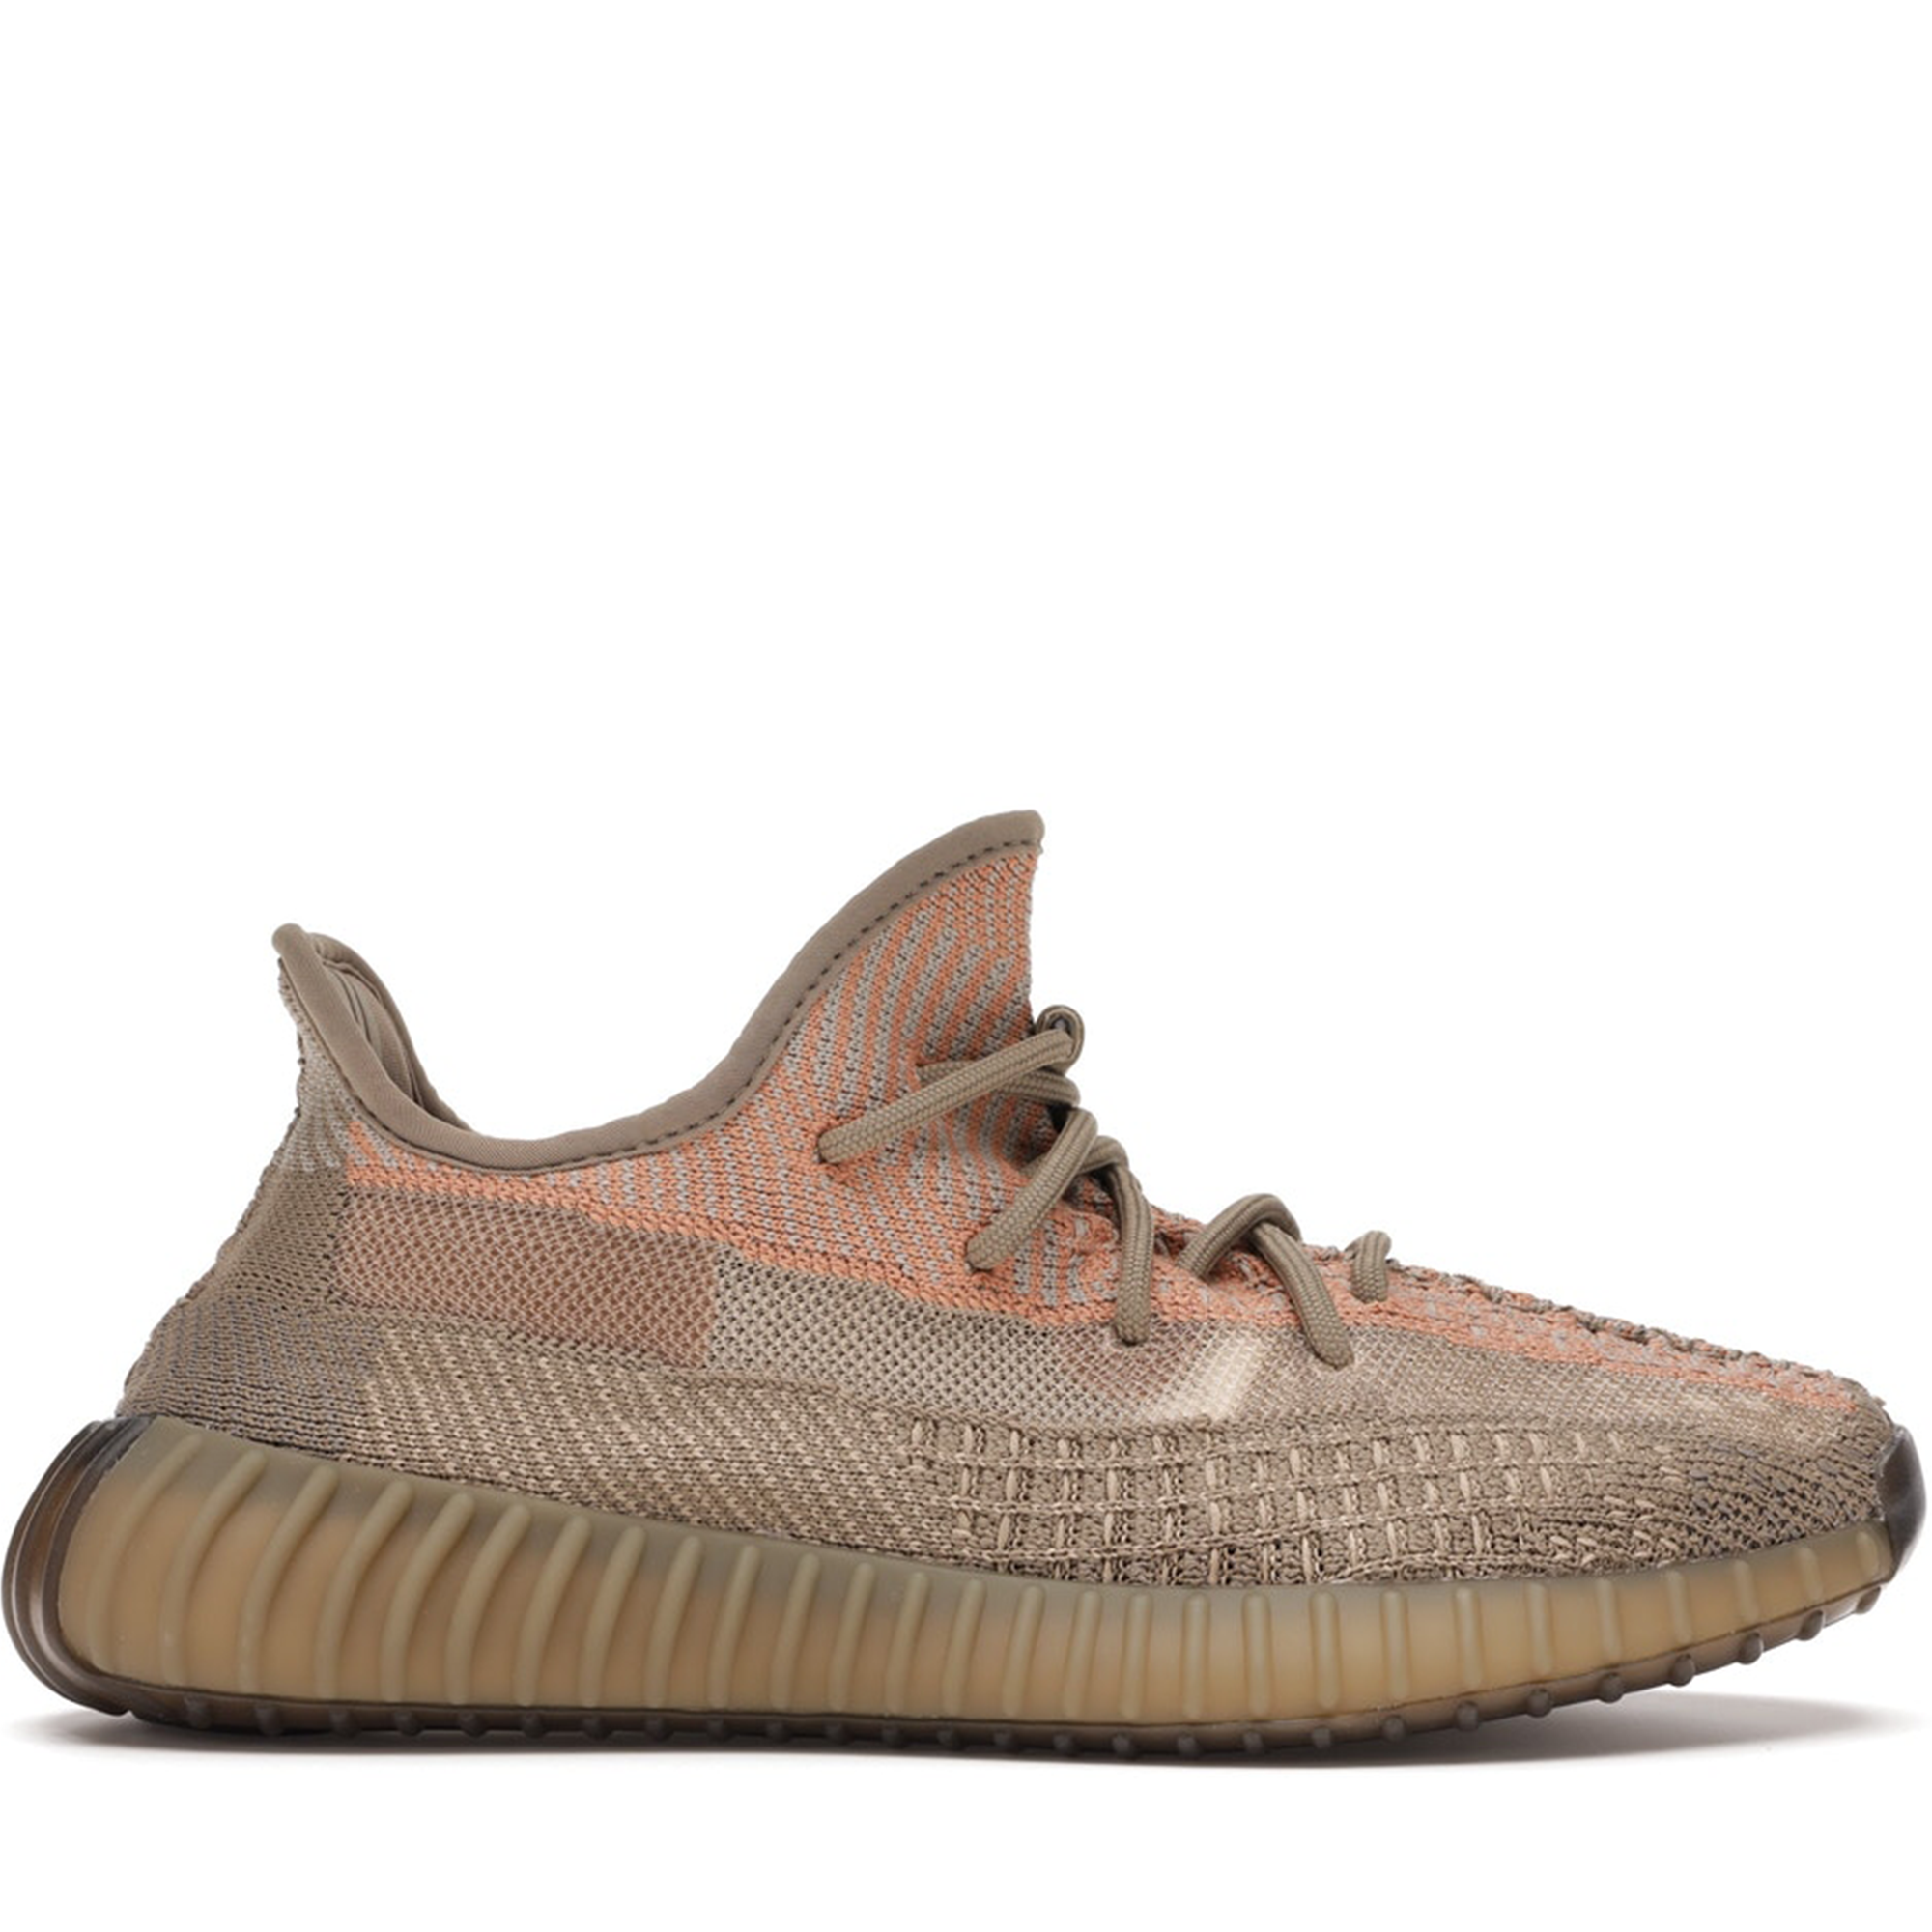 adidas Yeezy Boost 350 V2 Sand Taupe-PLUS